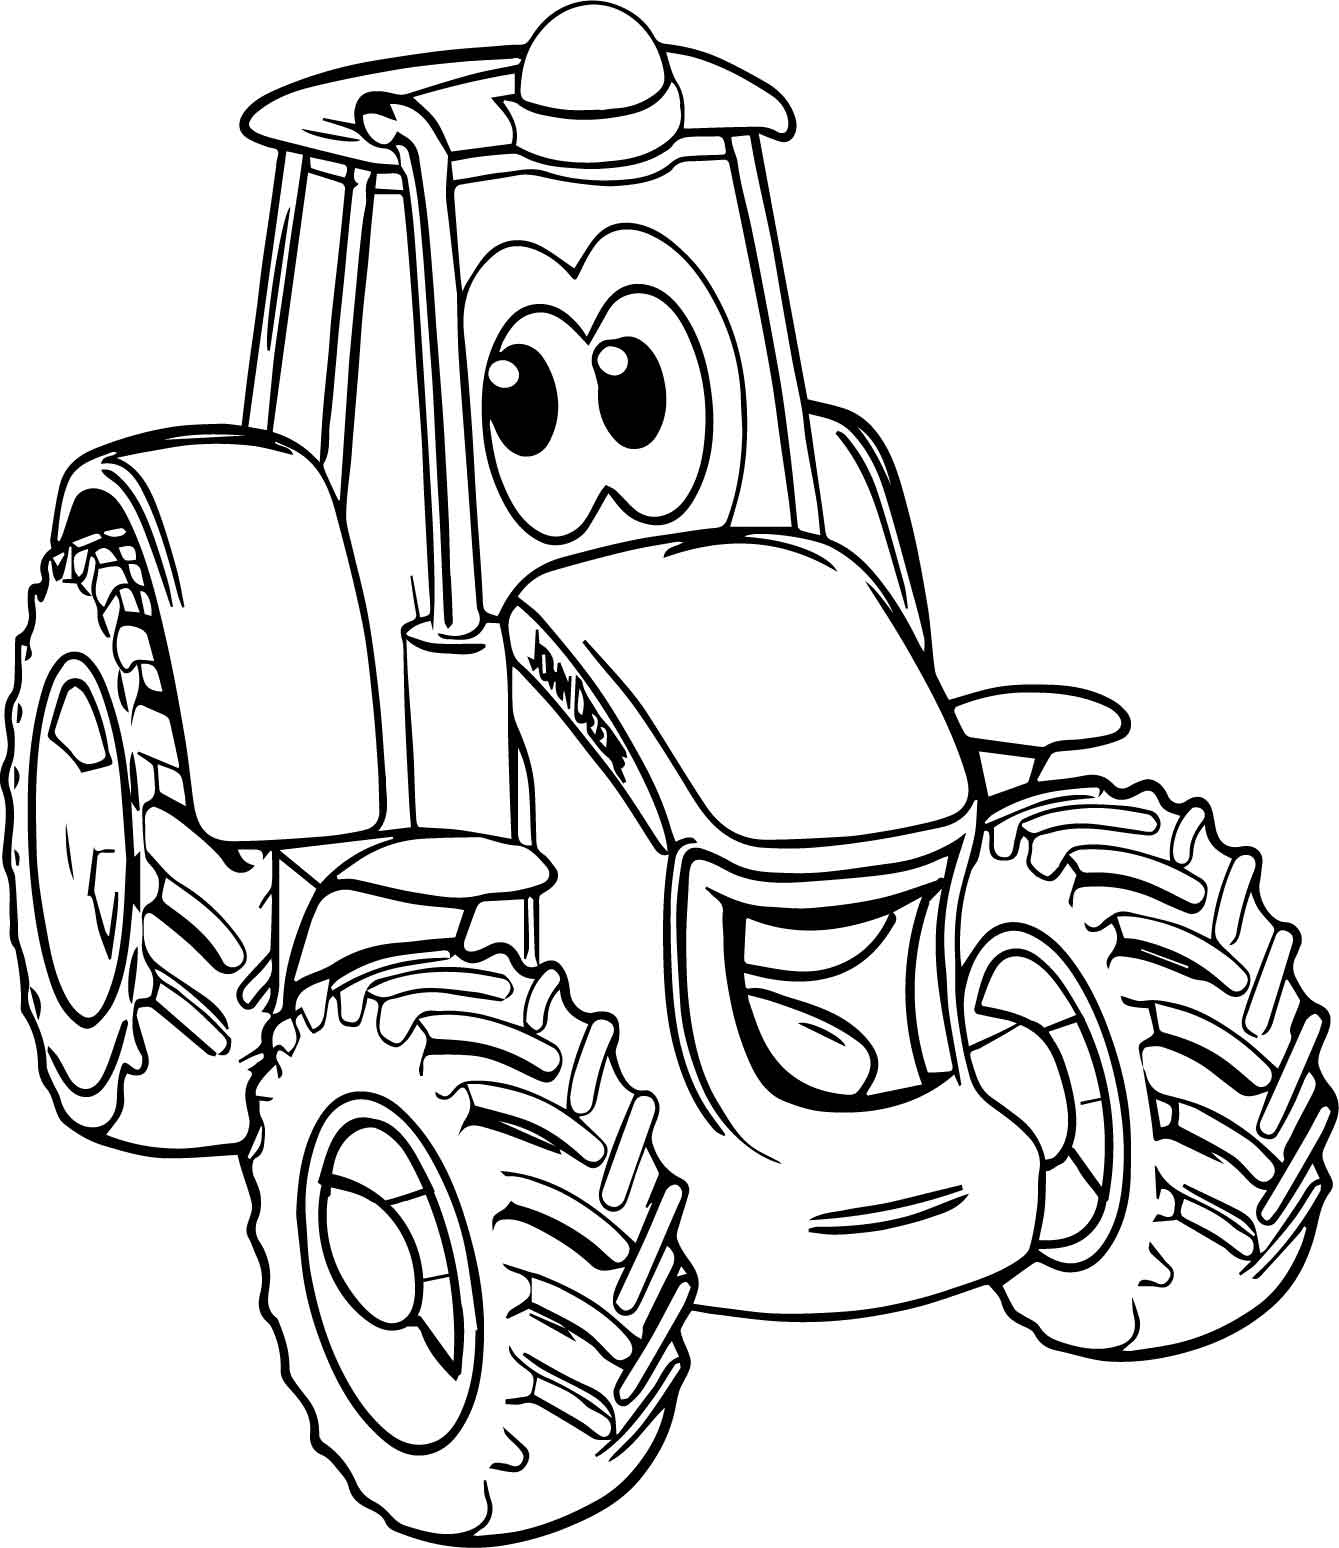 Coloring page Tractor Tractor with eyes for boys